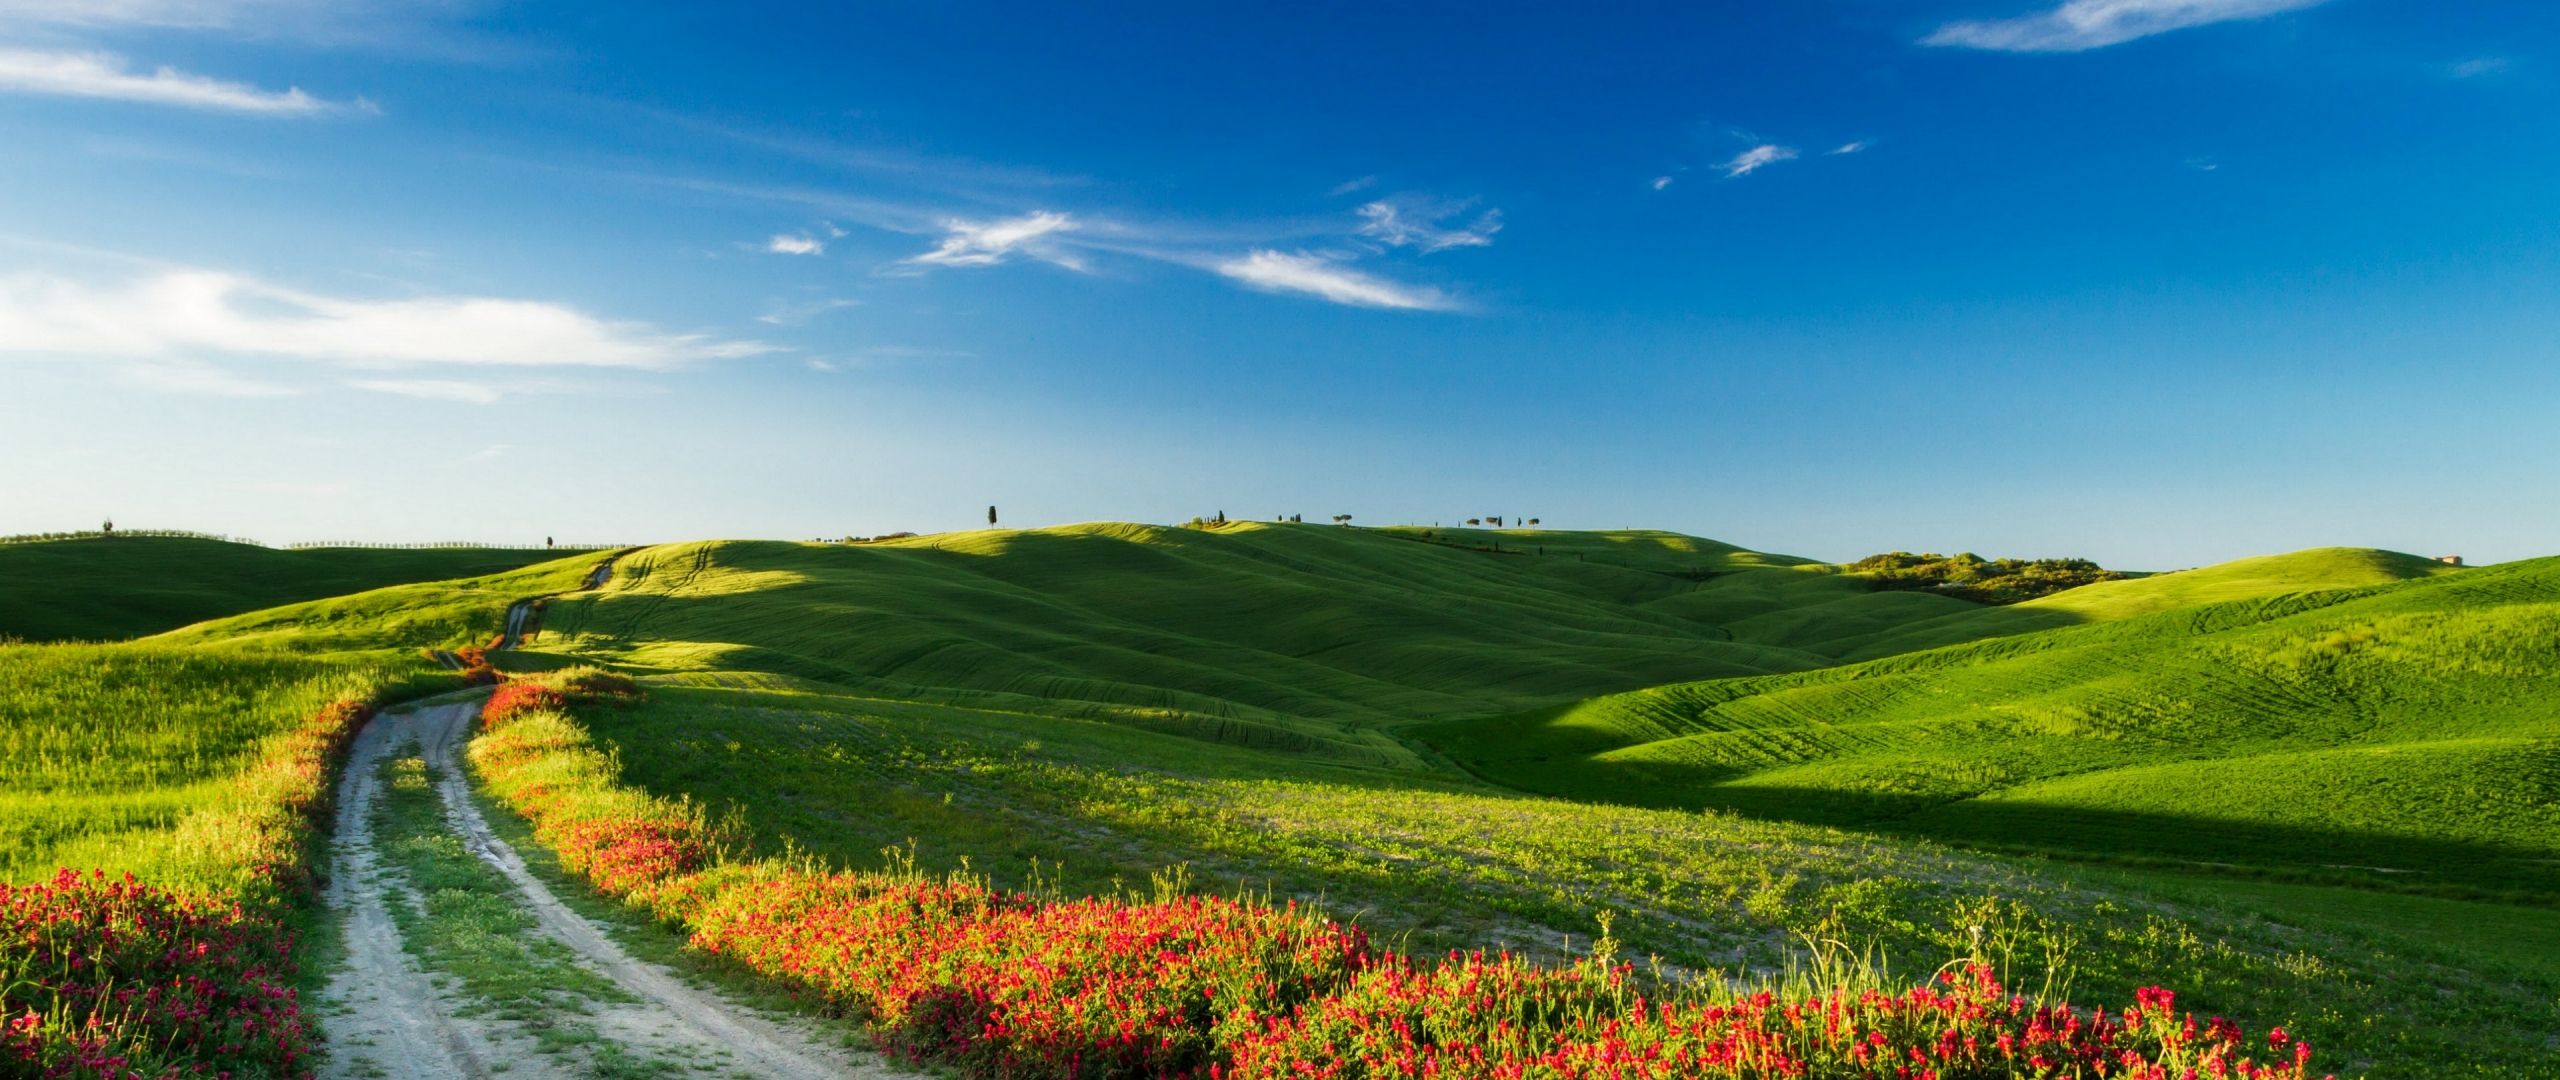 Download Tuscany, 4k, HD wallpaper, Italy, Meadows, road, wildflowers, sky Dual Wide display 1080p wallpaper 2560x1080